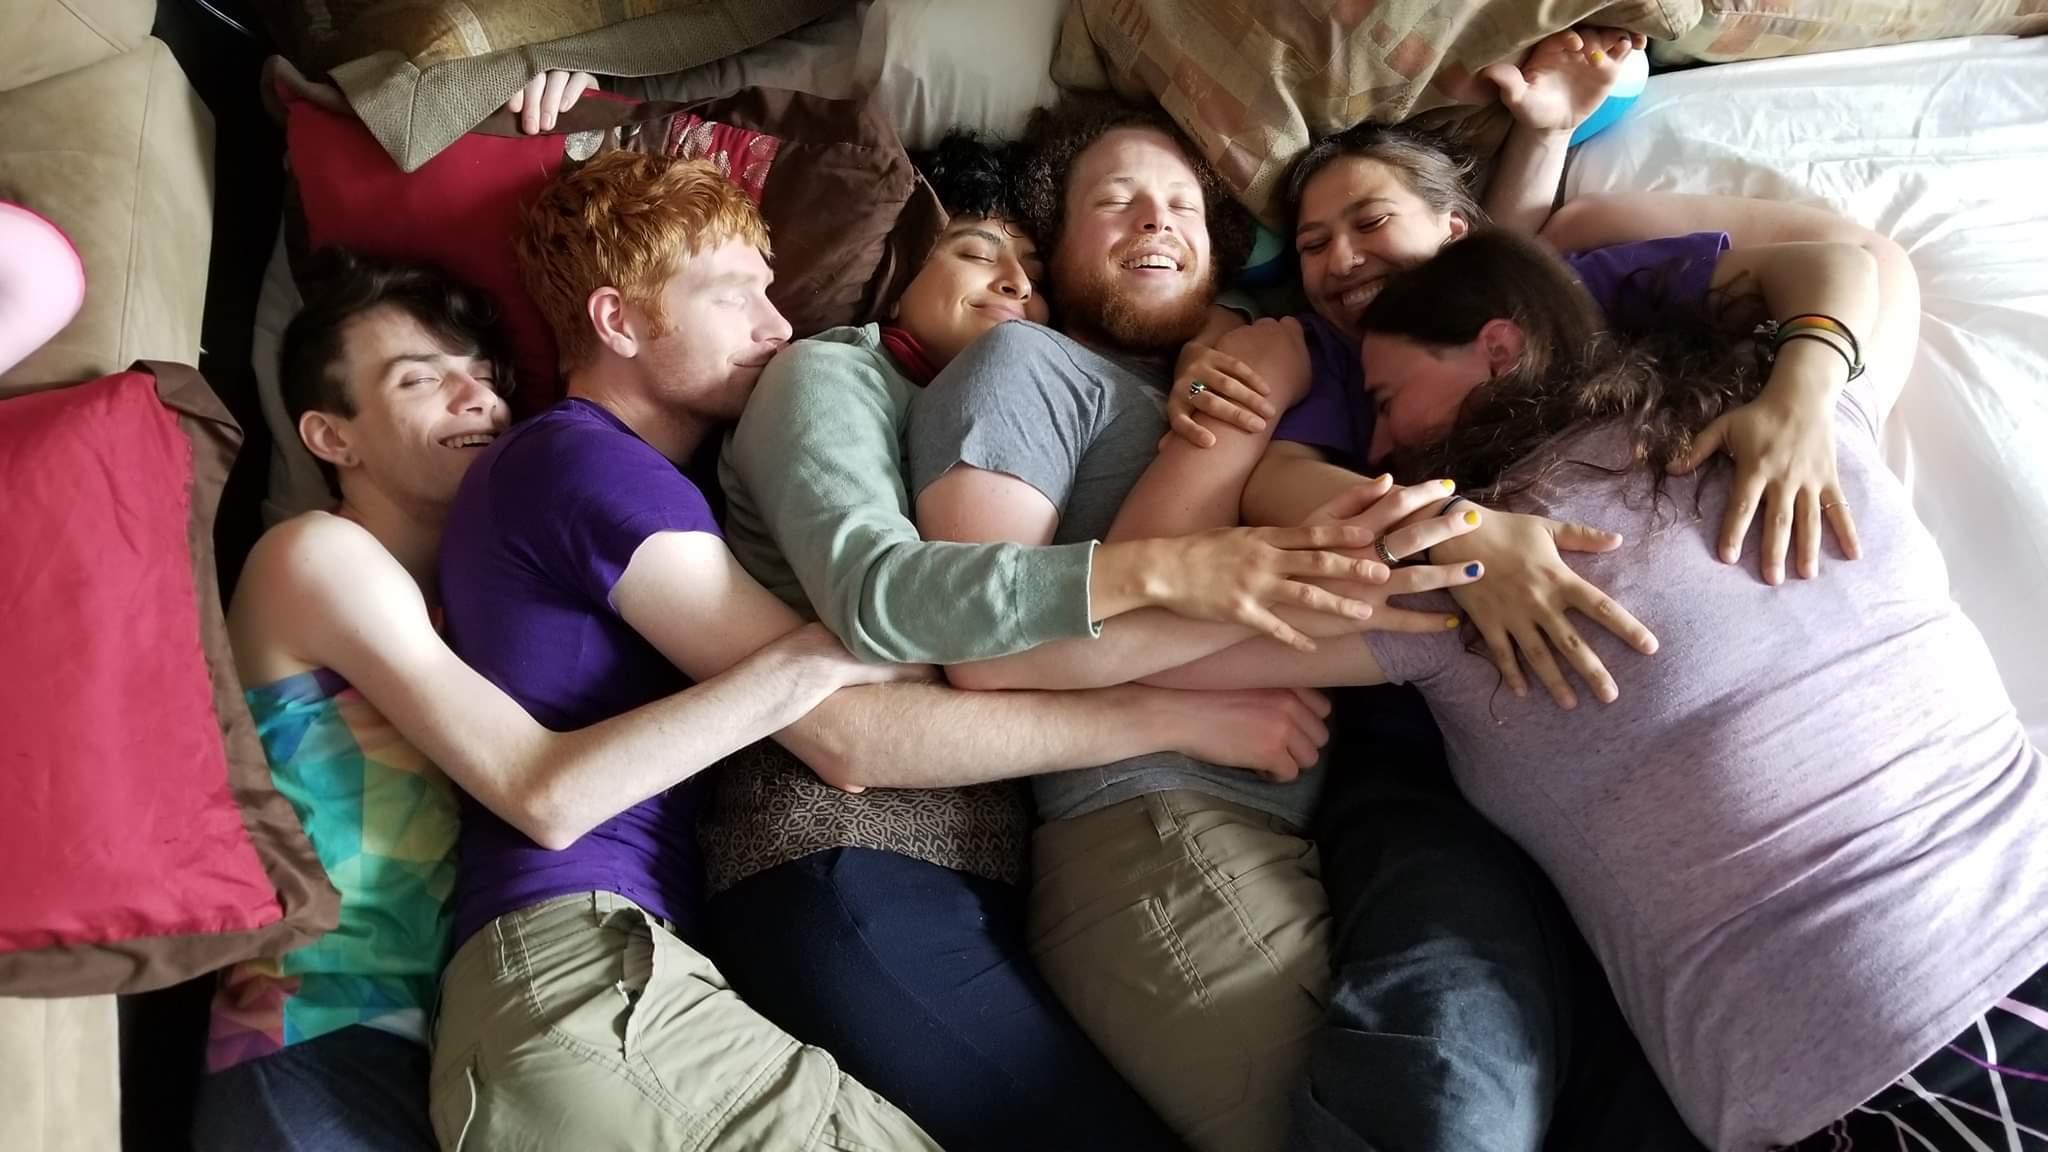 Cuddle Party and Consent Workshop in Midtown! 